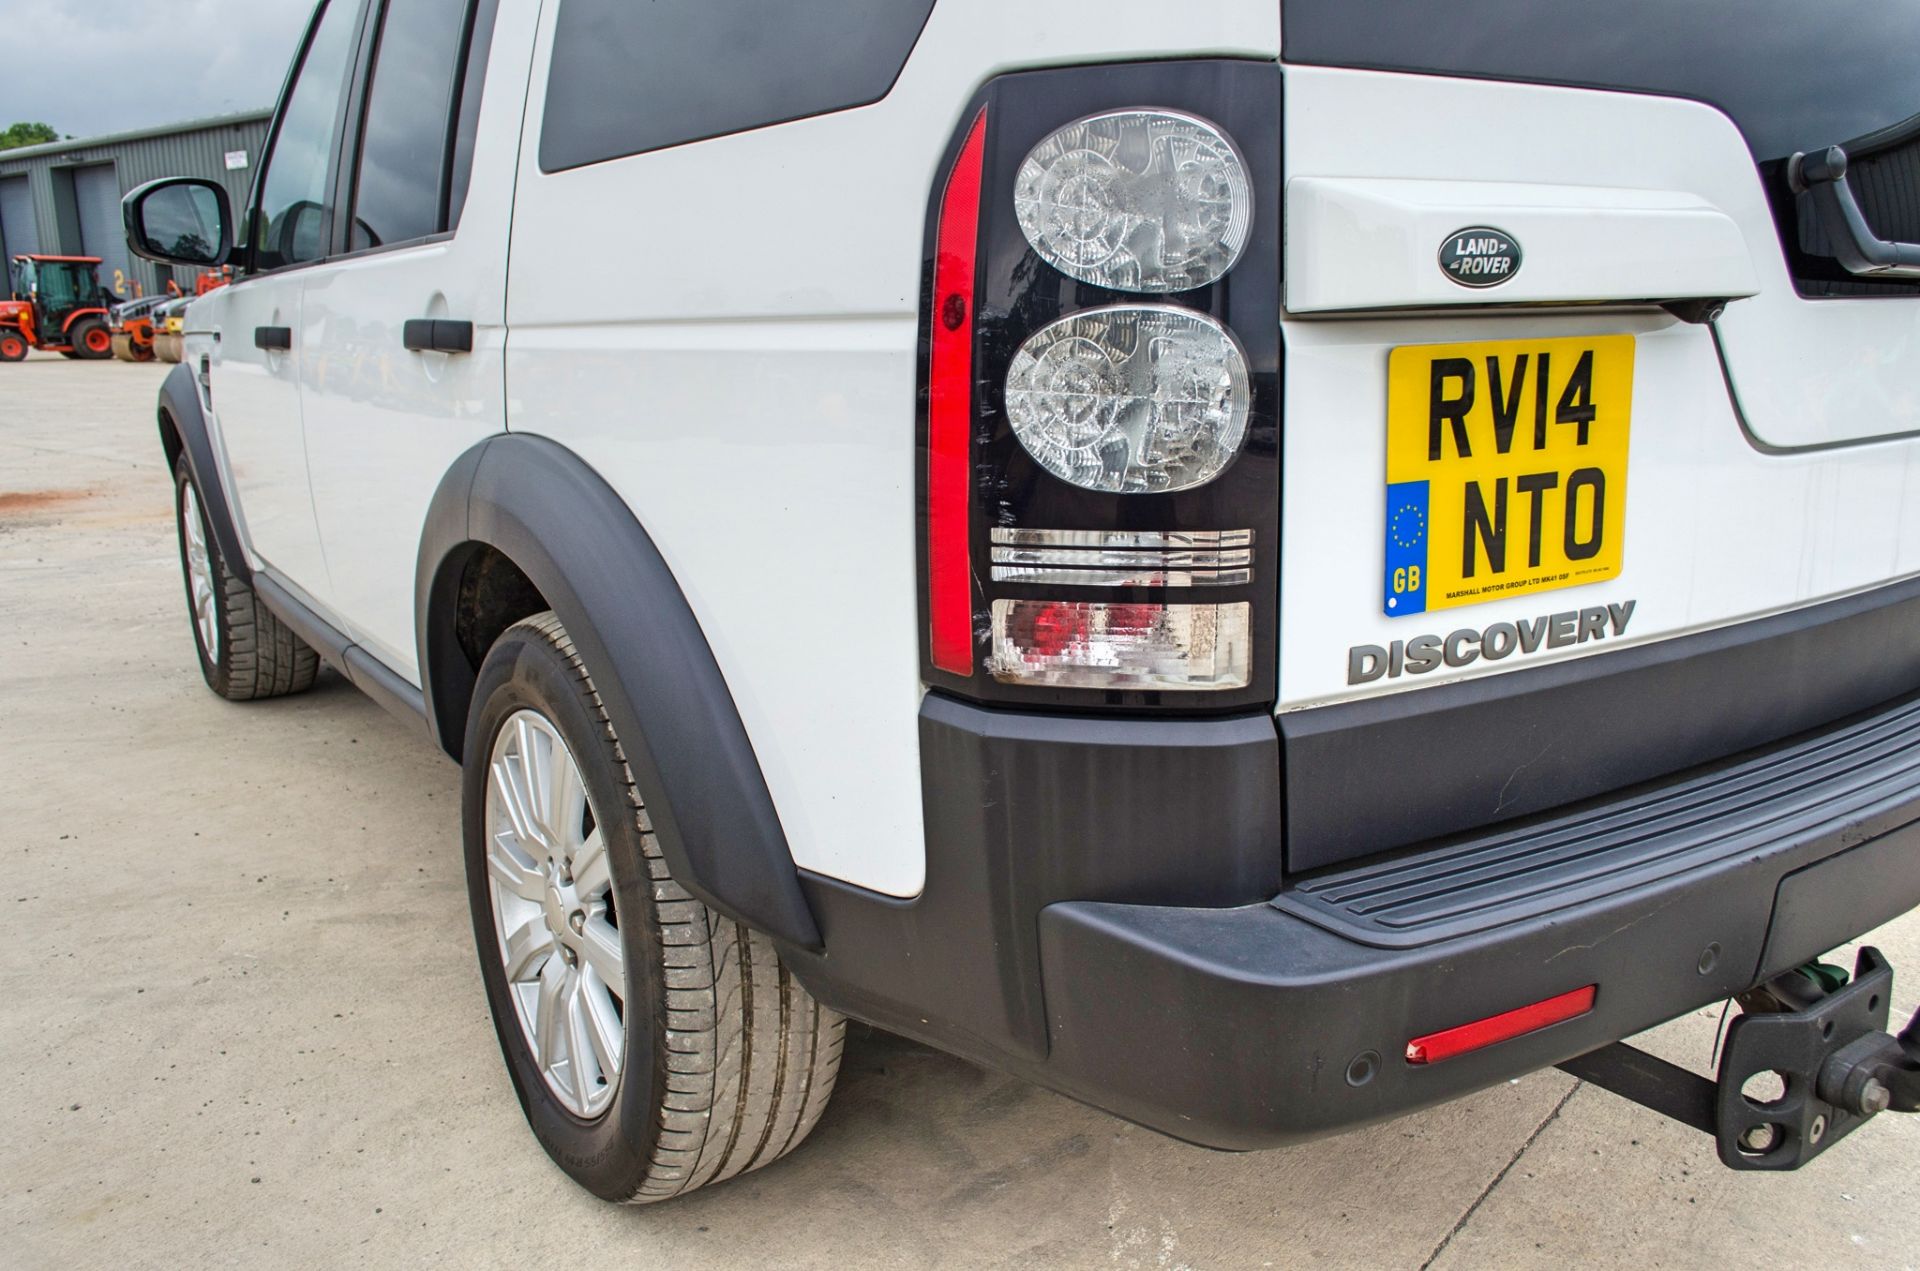 Land Rover Discovery 4 3.0 SDV6 255 XS Commercial 4x4 utility vehicle Registration Number: RV14 - Image 11 of 33